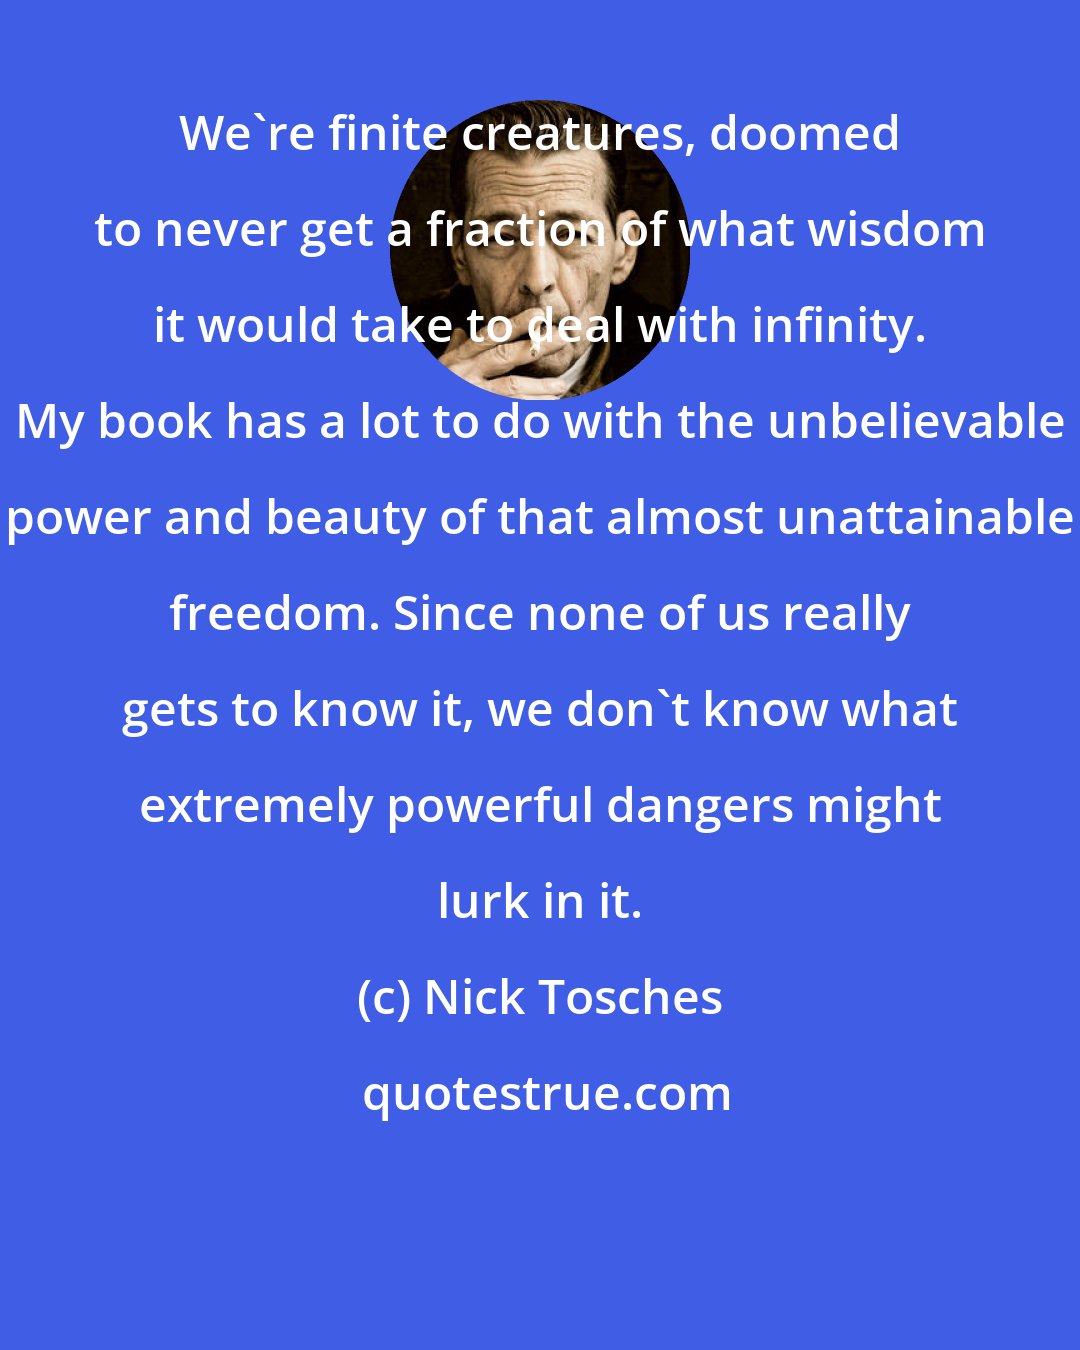 Nick Tosches: We're finite creatures, doomed to never get a fraction of what wisdom it would take to deal with infinity. My book has a lot to do with the unbelievable power and beauty of that almost unattainable freedom. Since none of us really gets to know it, we don't know what extremely powerful dangers might lurk in it.